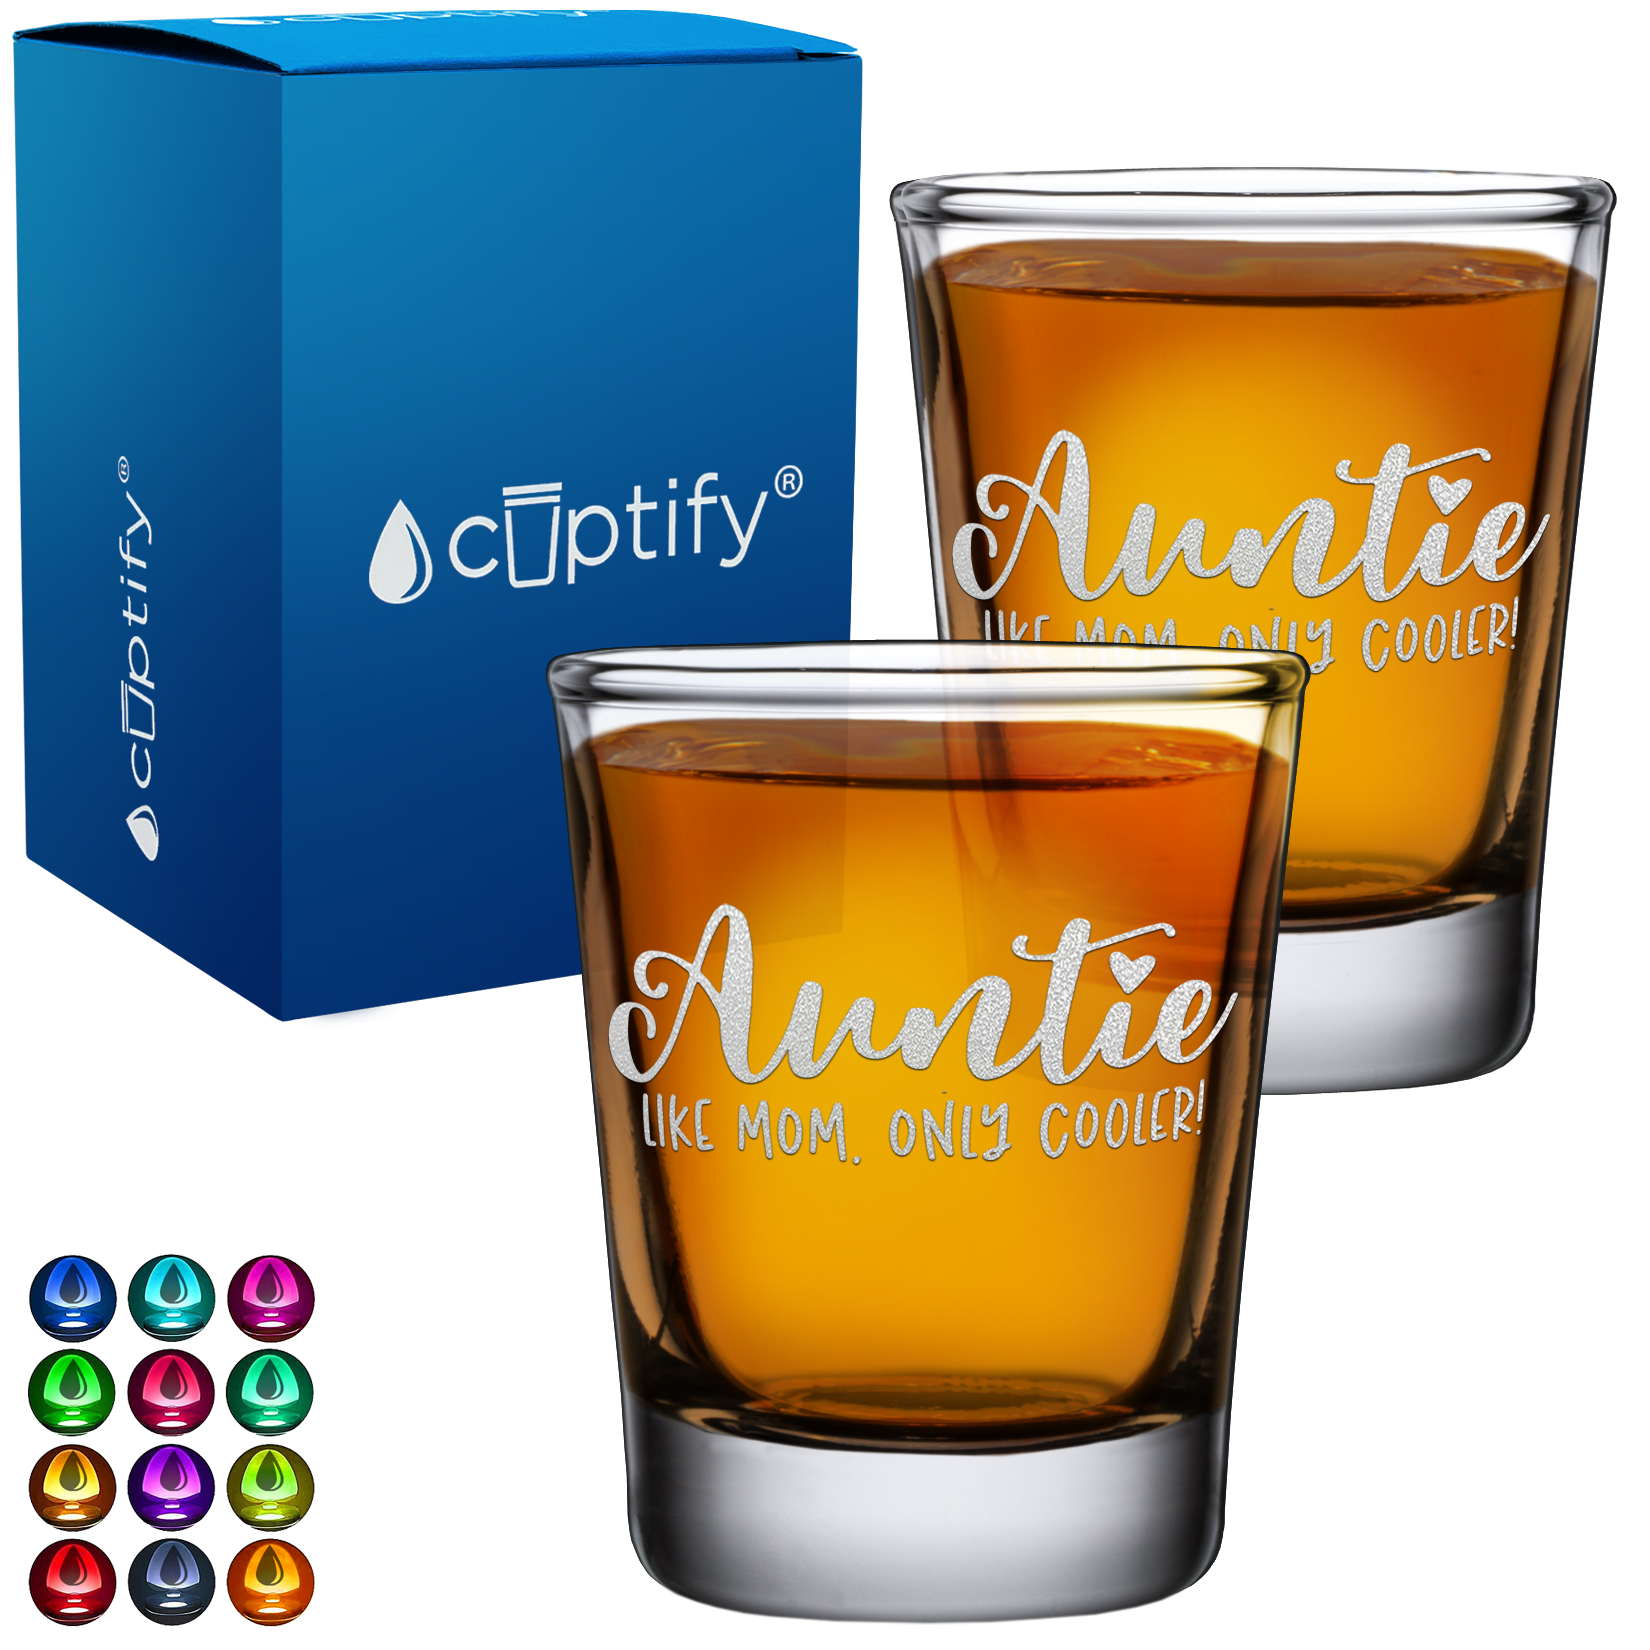 Auntie Like Mom, Only Cooler! 2oz Shot Glasses - Set of 2